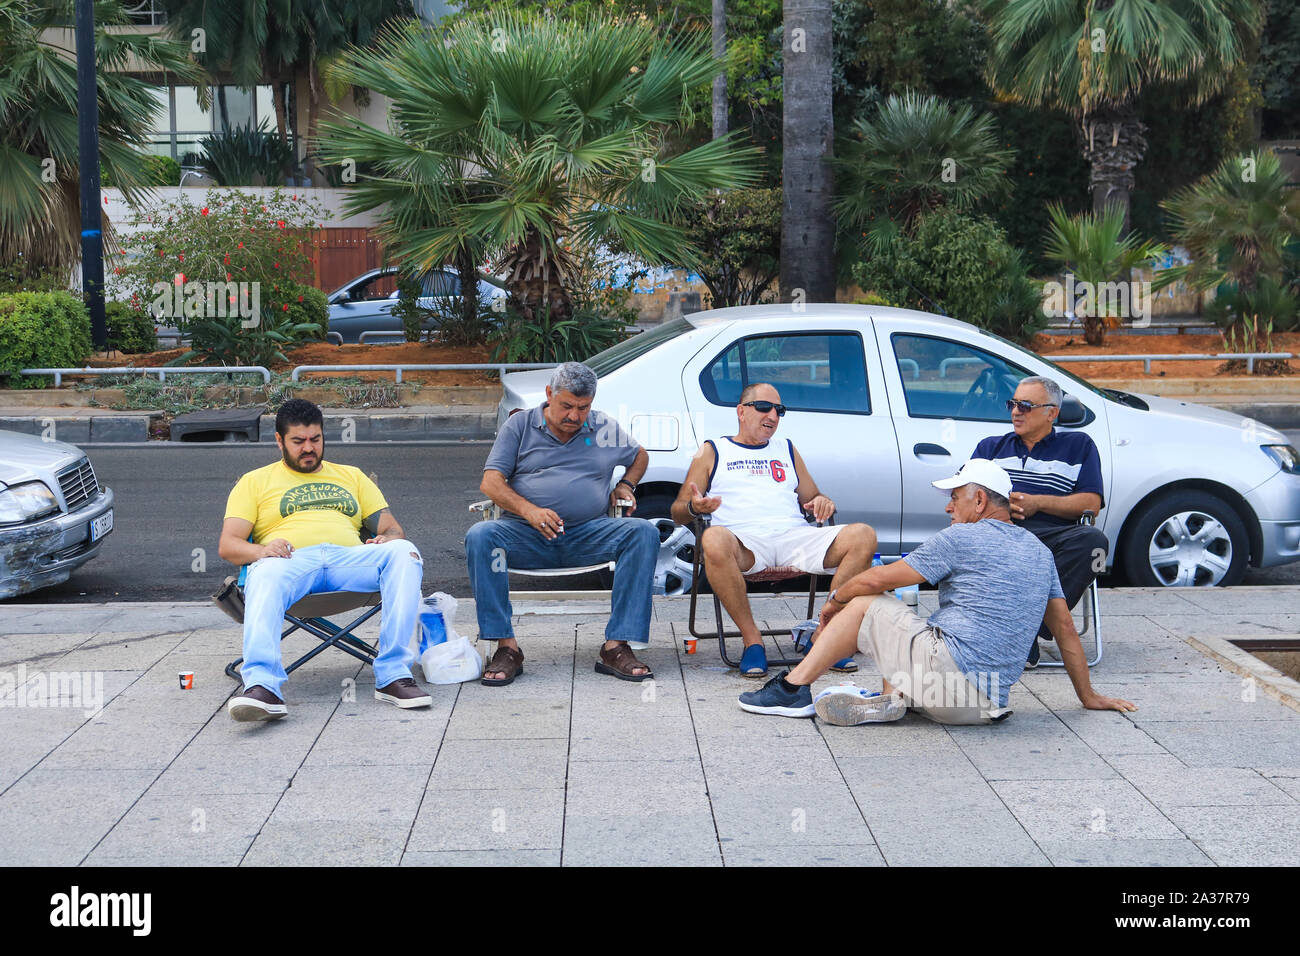 October 6, 2019, Beirut, Lebanon: Men sheltering in a shade during the hot and humid day in Beirut. (Credit Image: © Amer Ghazzal/SOPA Images via ZUMA Wire) Stock Photo